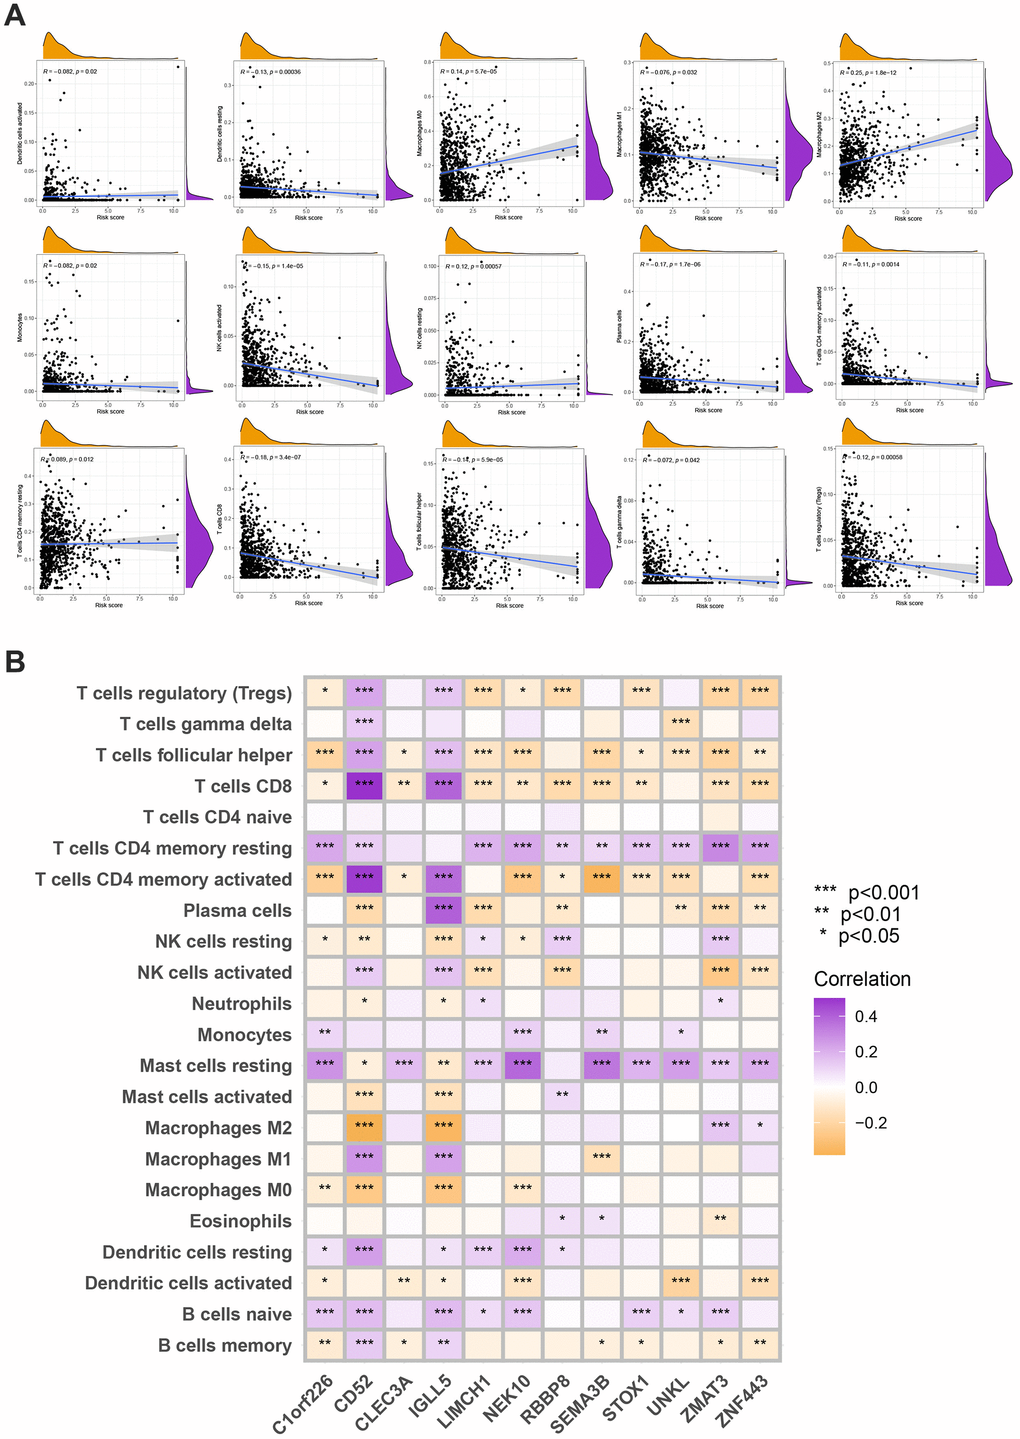 (A) Spearman’s correlation coefficients were computed to investigate the potential relationship between risk score and immune cell infiltration status. (B) Spearman’s correlation coefficients were computed to investigate the potential relationship between immune cells infiltration levels and gene expression levels. Colors from orange to purple indicate the trend of correlation from negative to positive. *P